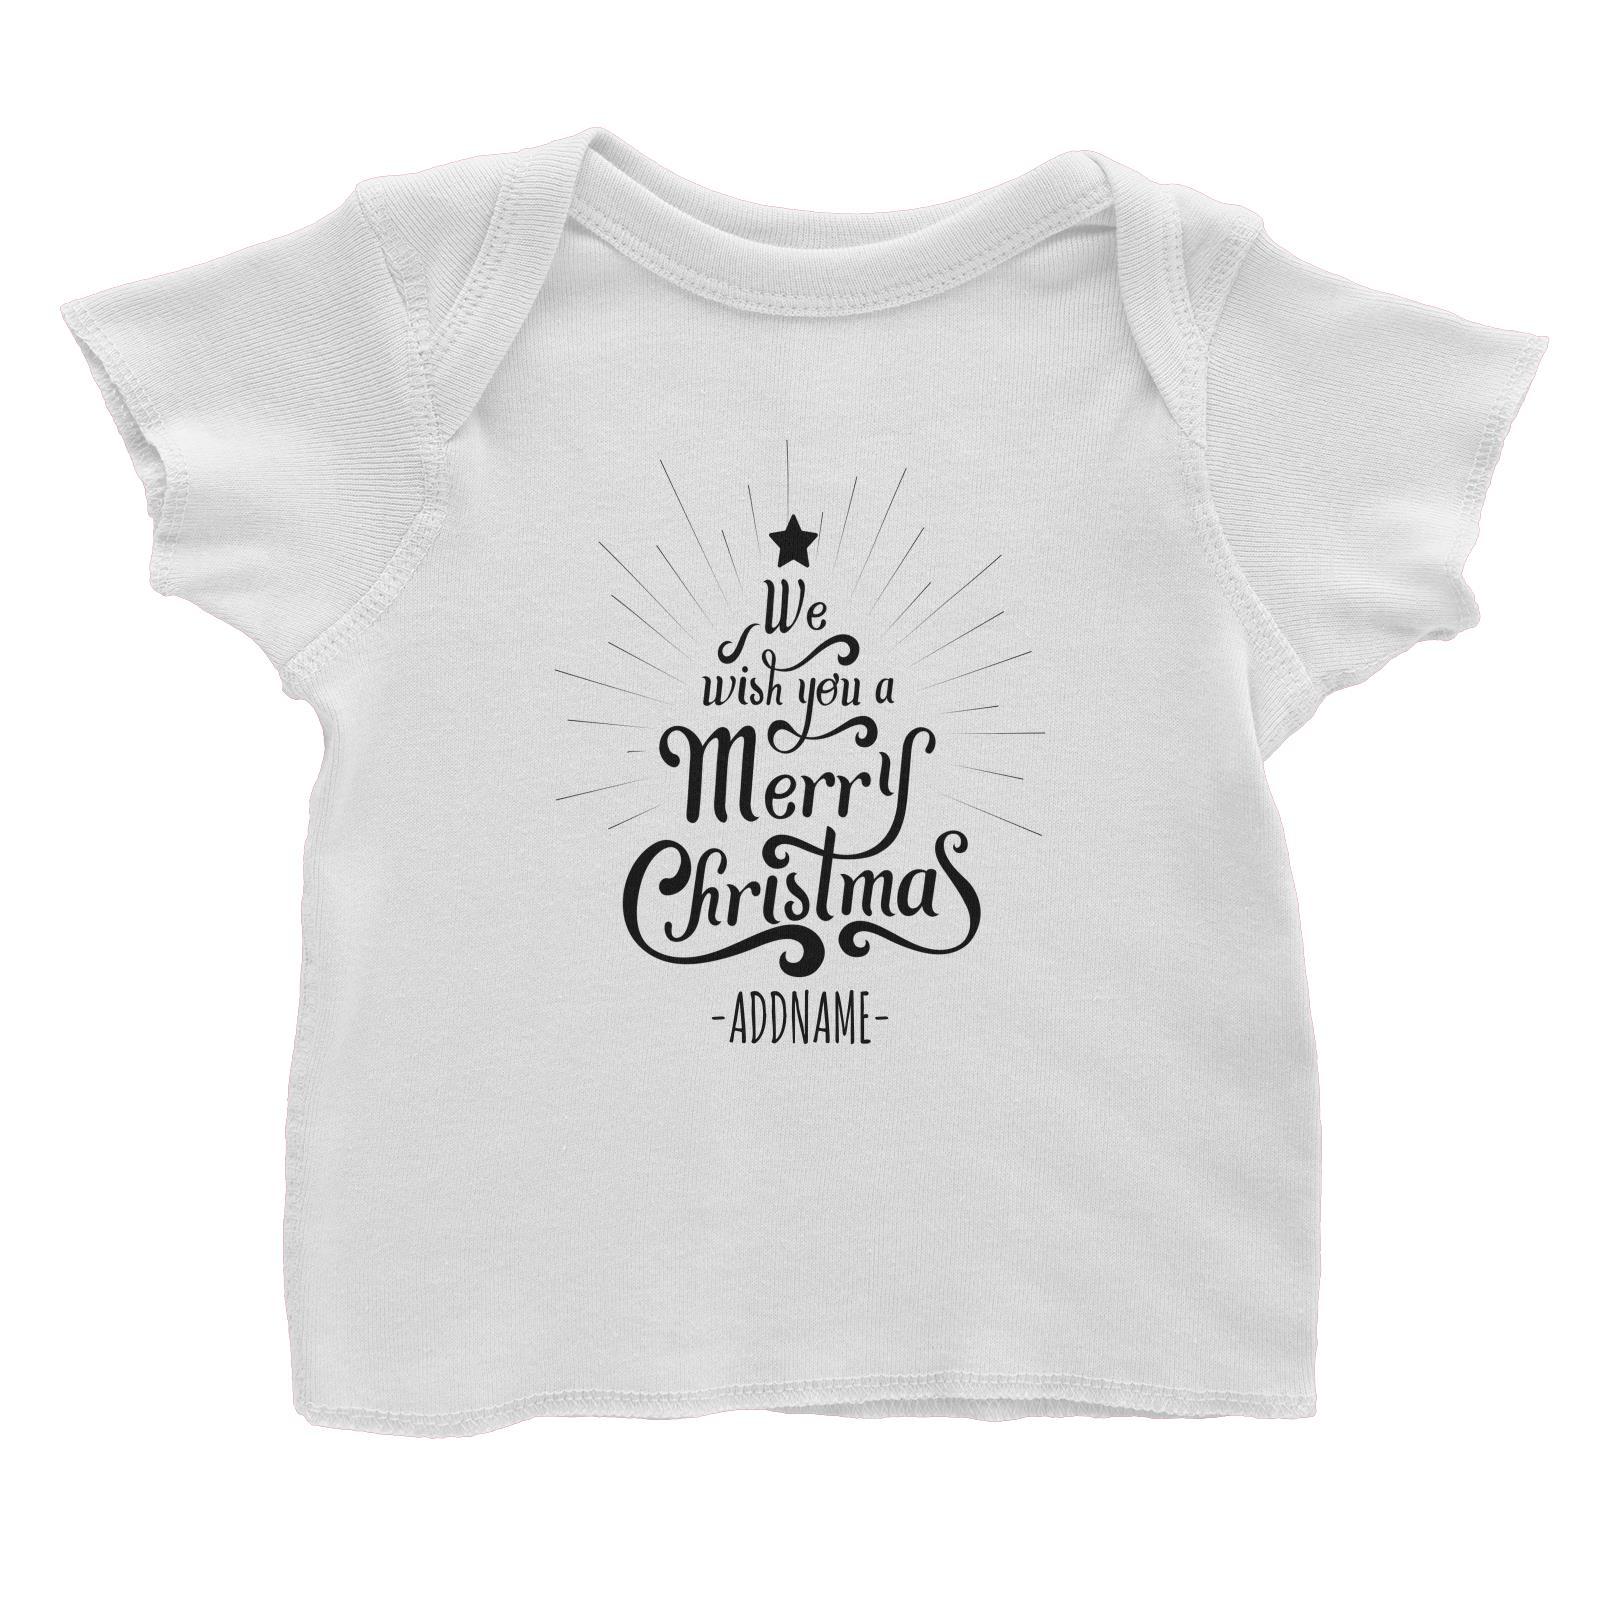 We Wish You A Merry Christmas Greeting Addname Baby T-Shirt  Personalizable Designs Lettering Matching Family